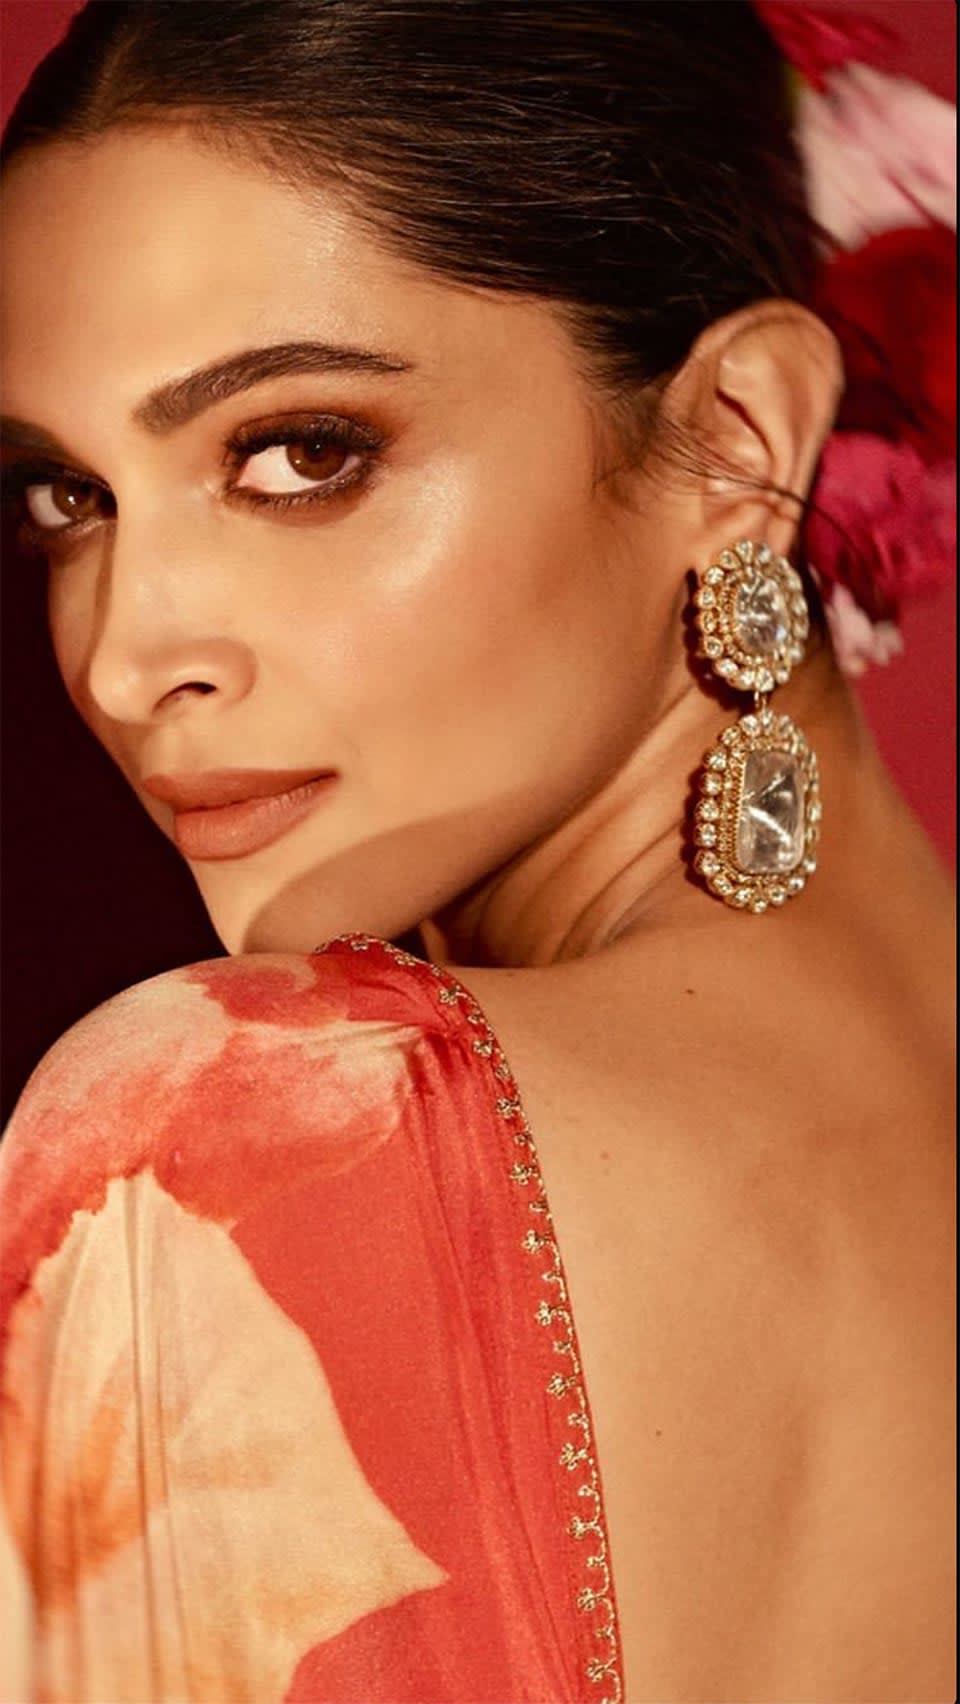 [Image: Deepika_Padukone_Stuns_in_a_Floral_Red_S...96abfc.jpg]